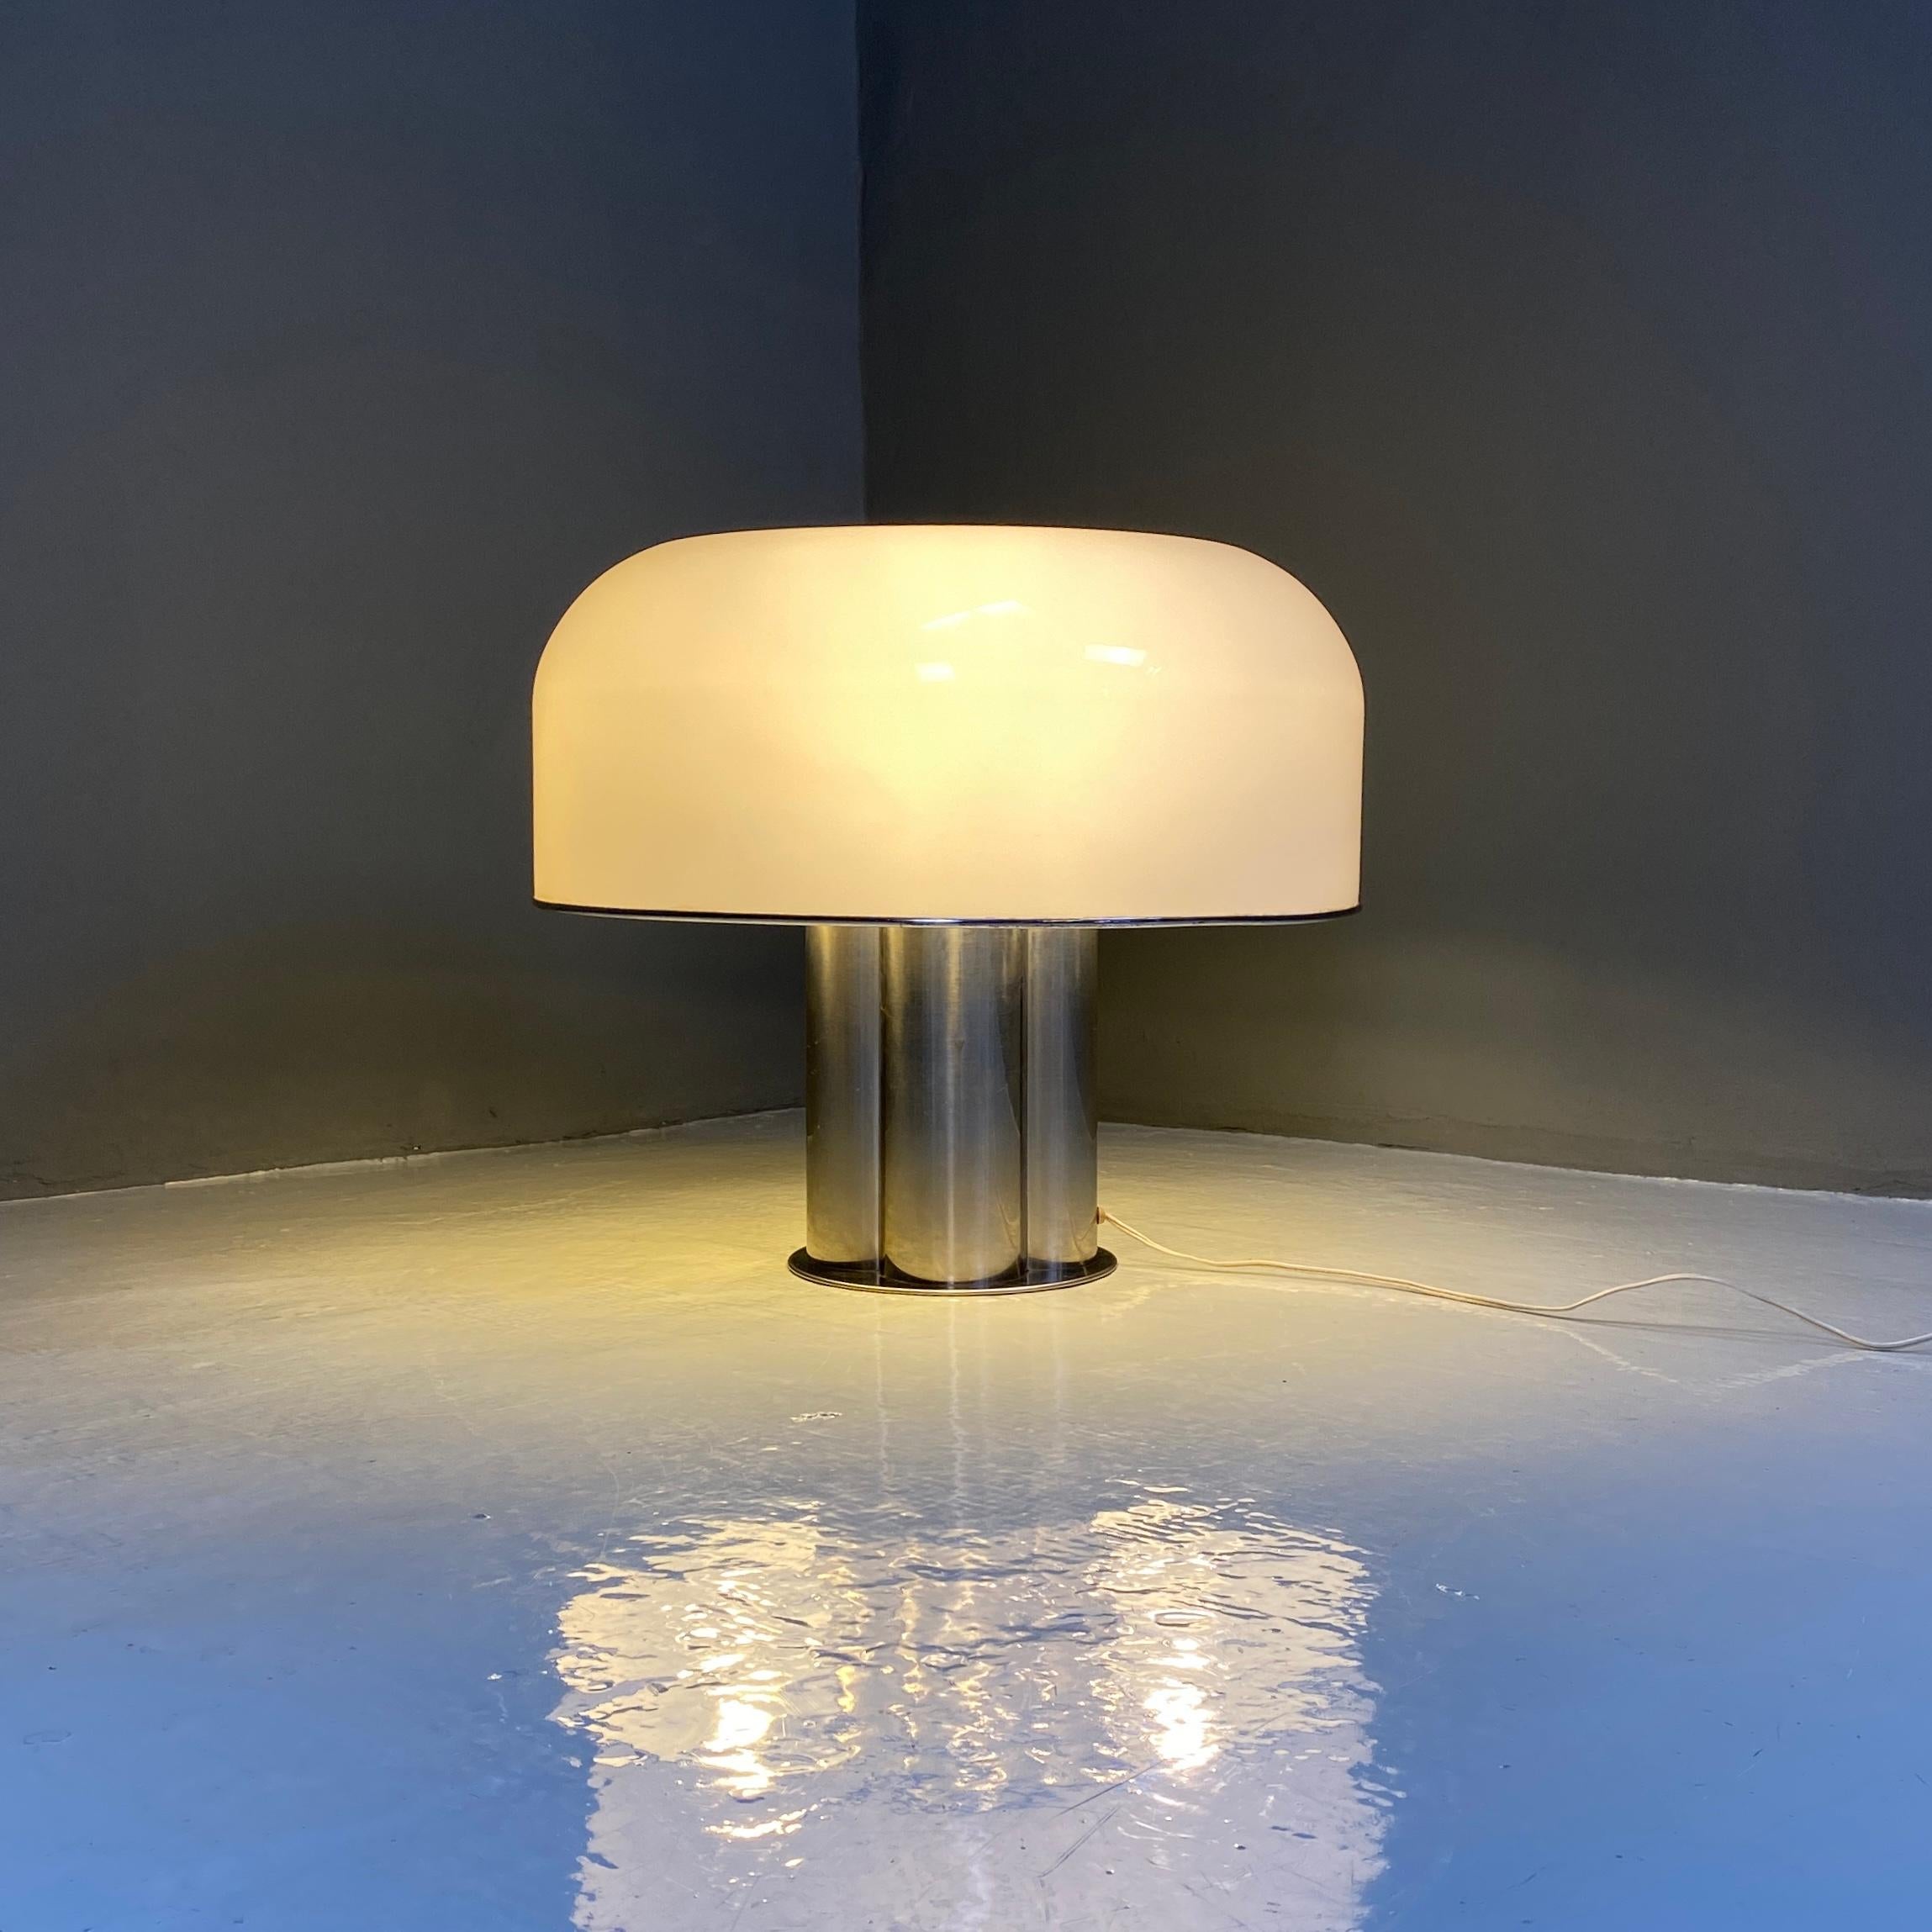 Chromed and plexiglass table lamp by Harvey Luce Iguzzini, 1970s
Mushroom table lamp with chromed metal base and white pelxiglass lampshade. Present label of the Harvey Luce Iguzzini brand, produced in the 1970's.

Good conditions

Measurements